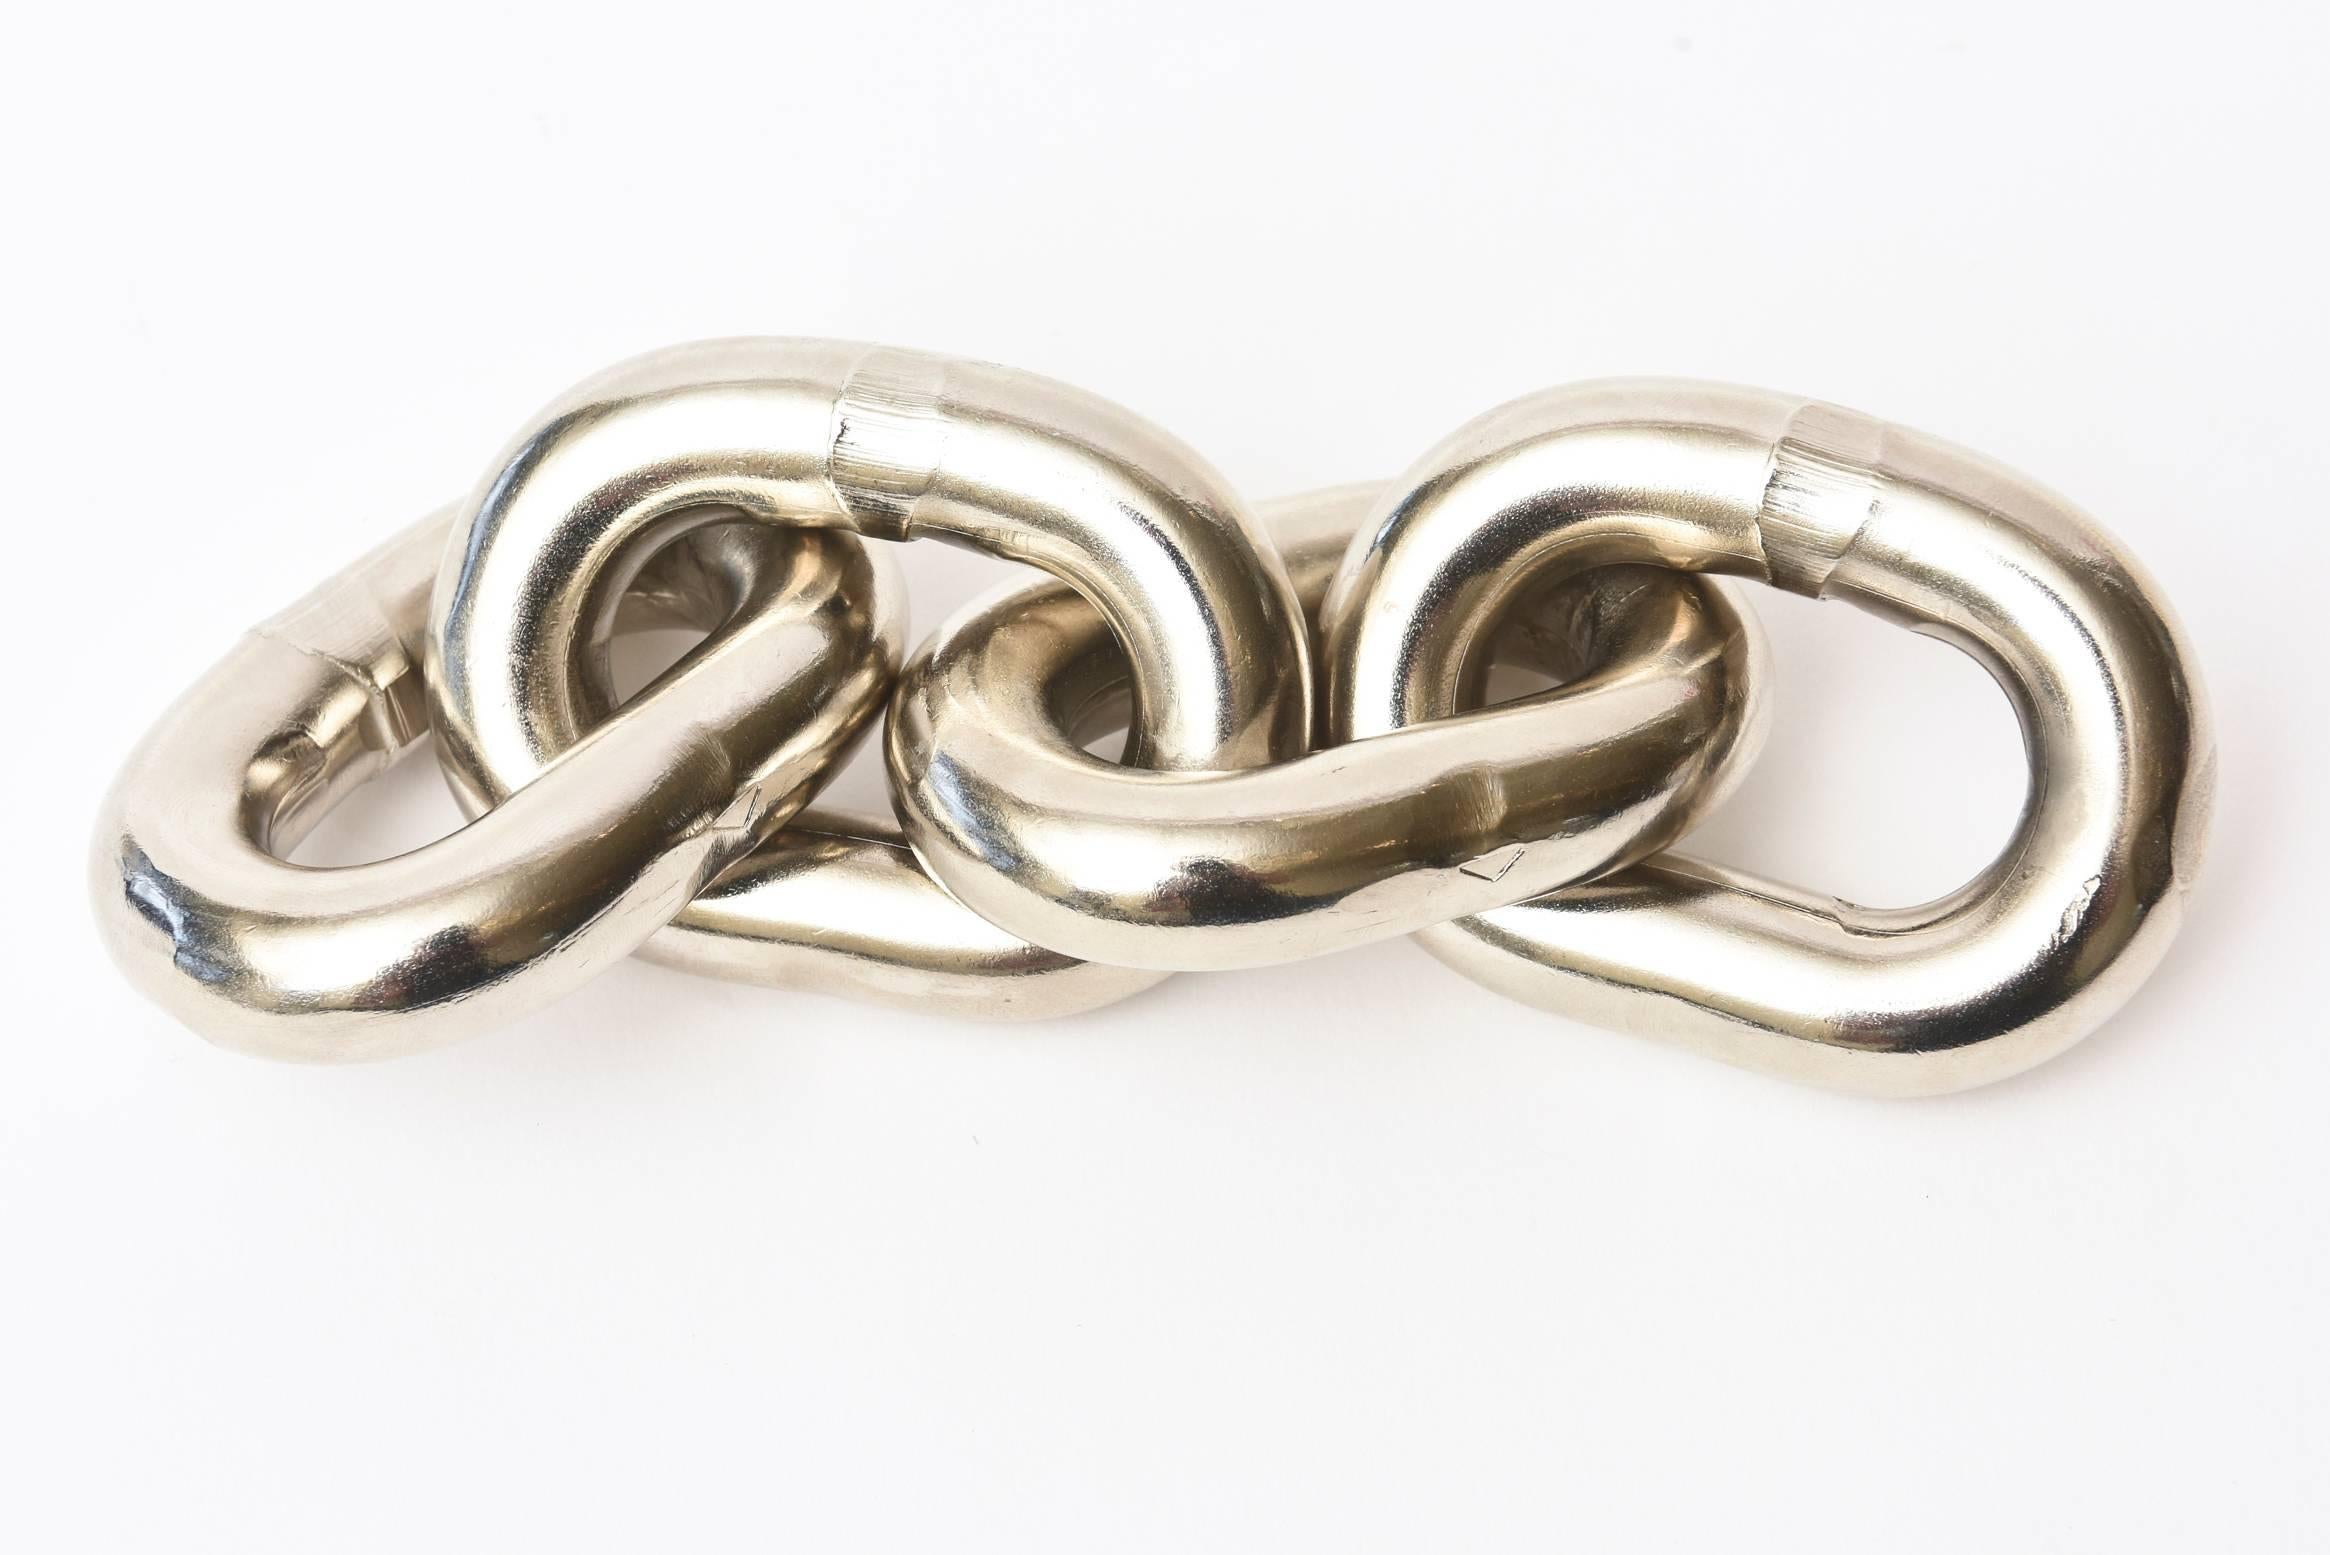 Mid-20th Century Carl Aubock Silvered Bronze Four-Chain Link Paperweight Sculpture/Desk Accessory